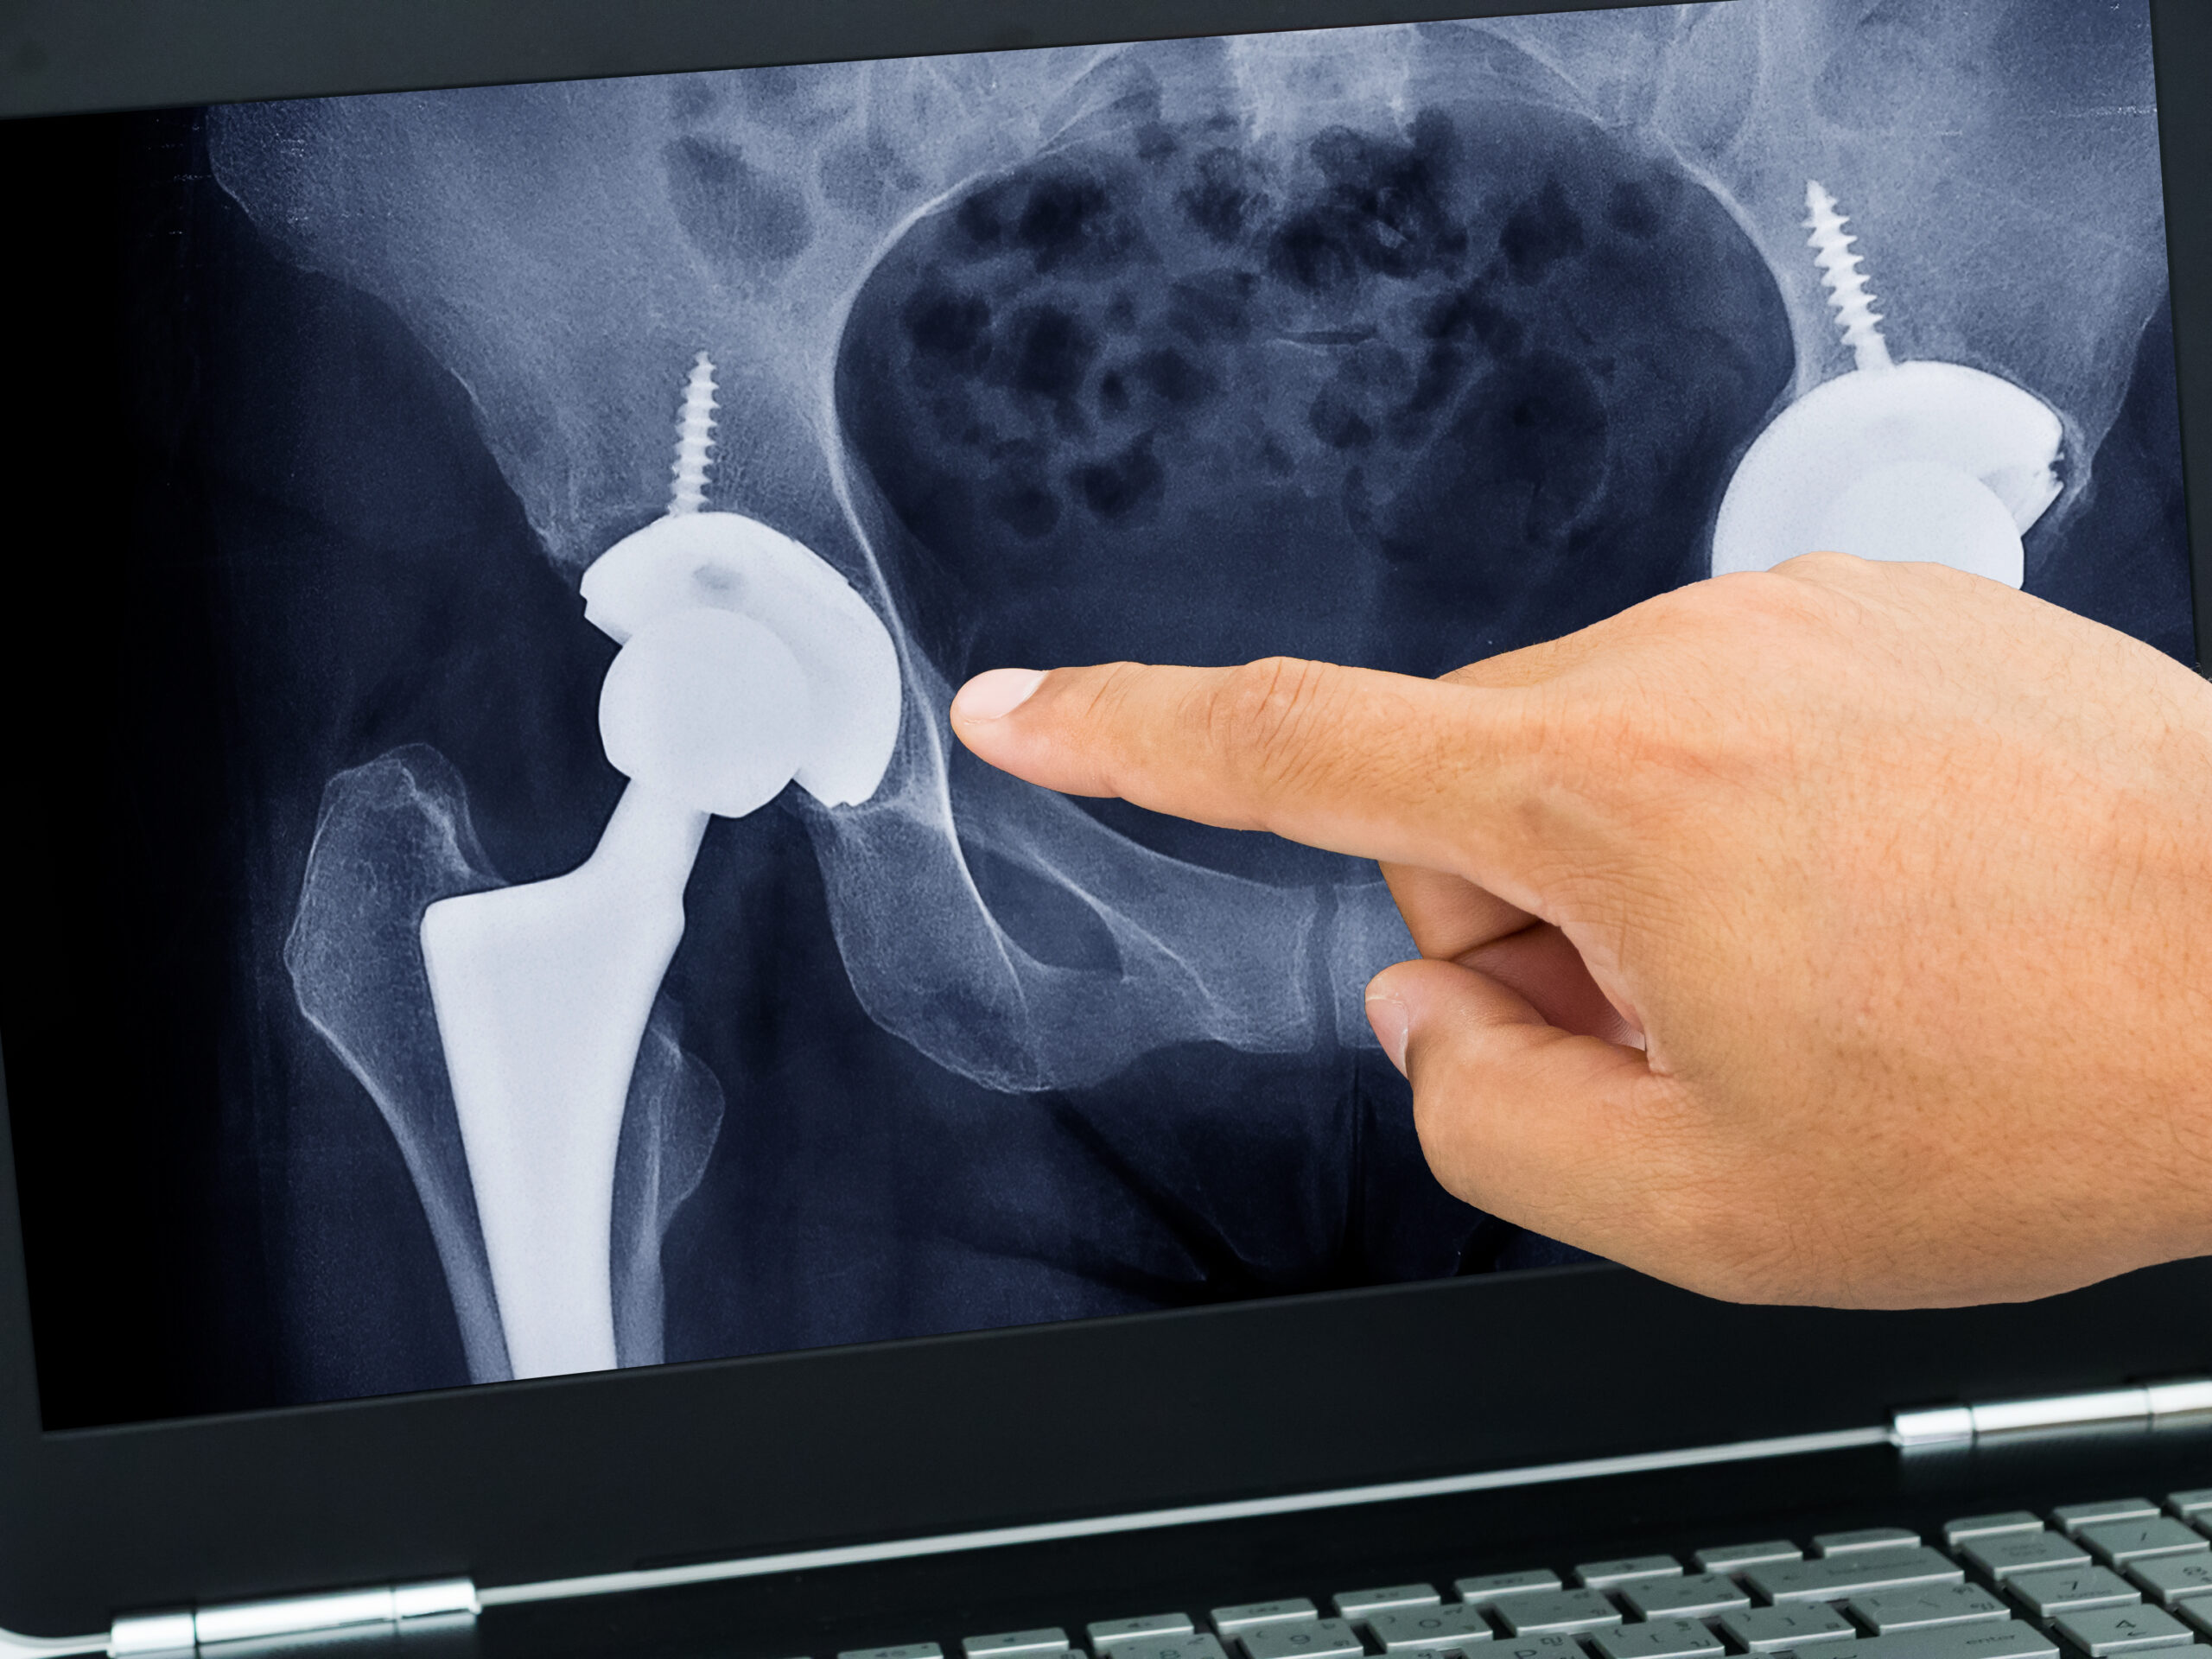 Total Hip Replacement Arthroplasty (THA)